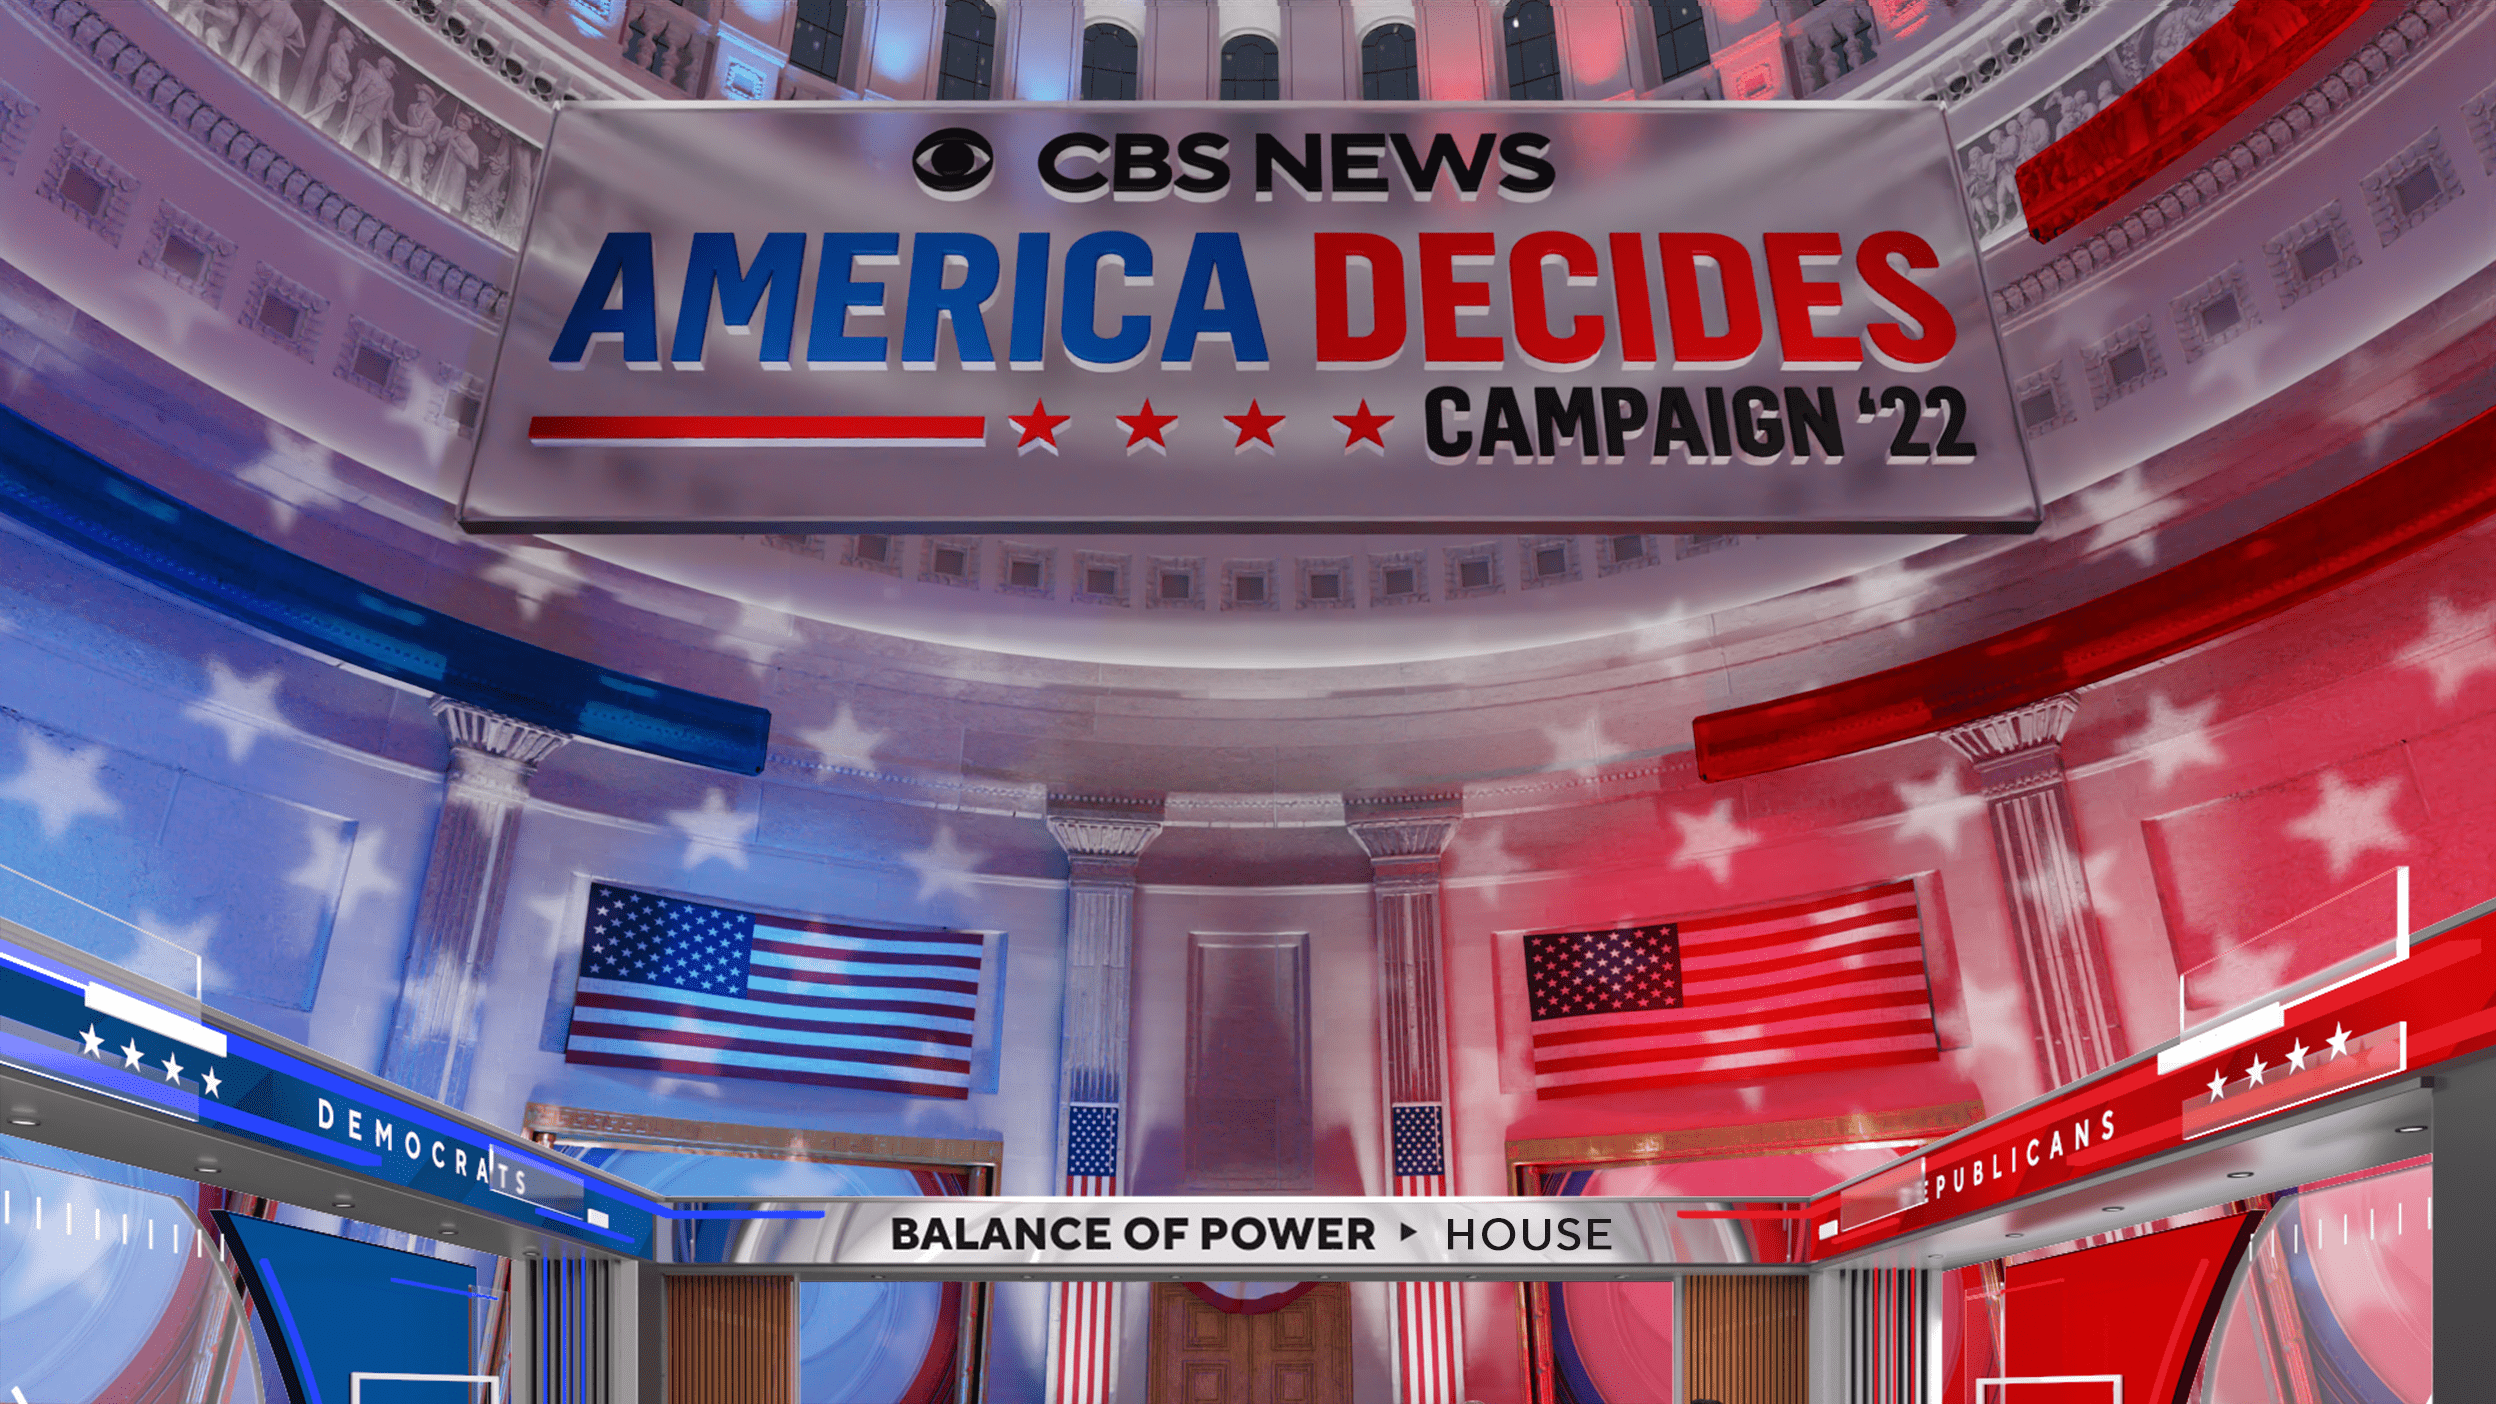 104 BPS CBS MIDTERM ELECTIONS BALANCE OF POWER HOUSE